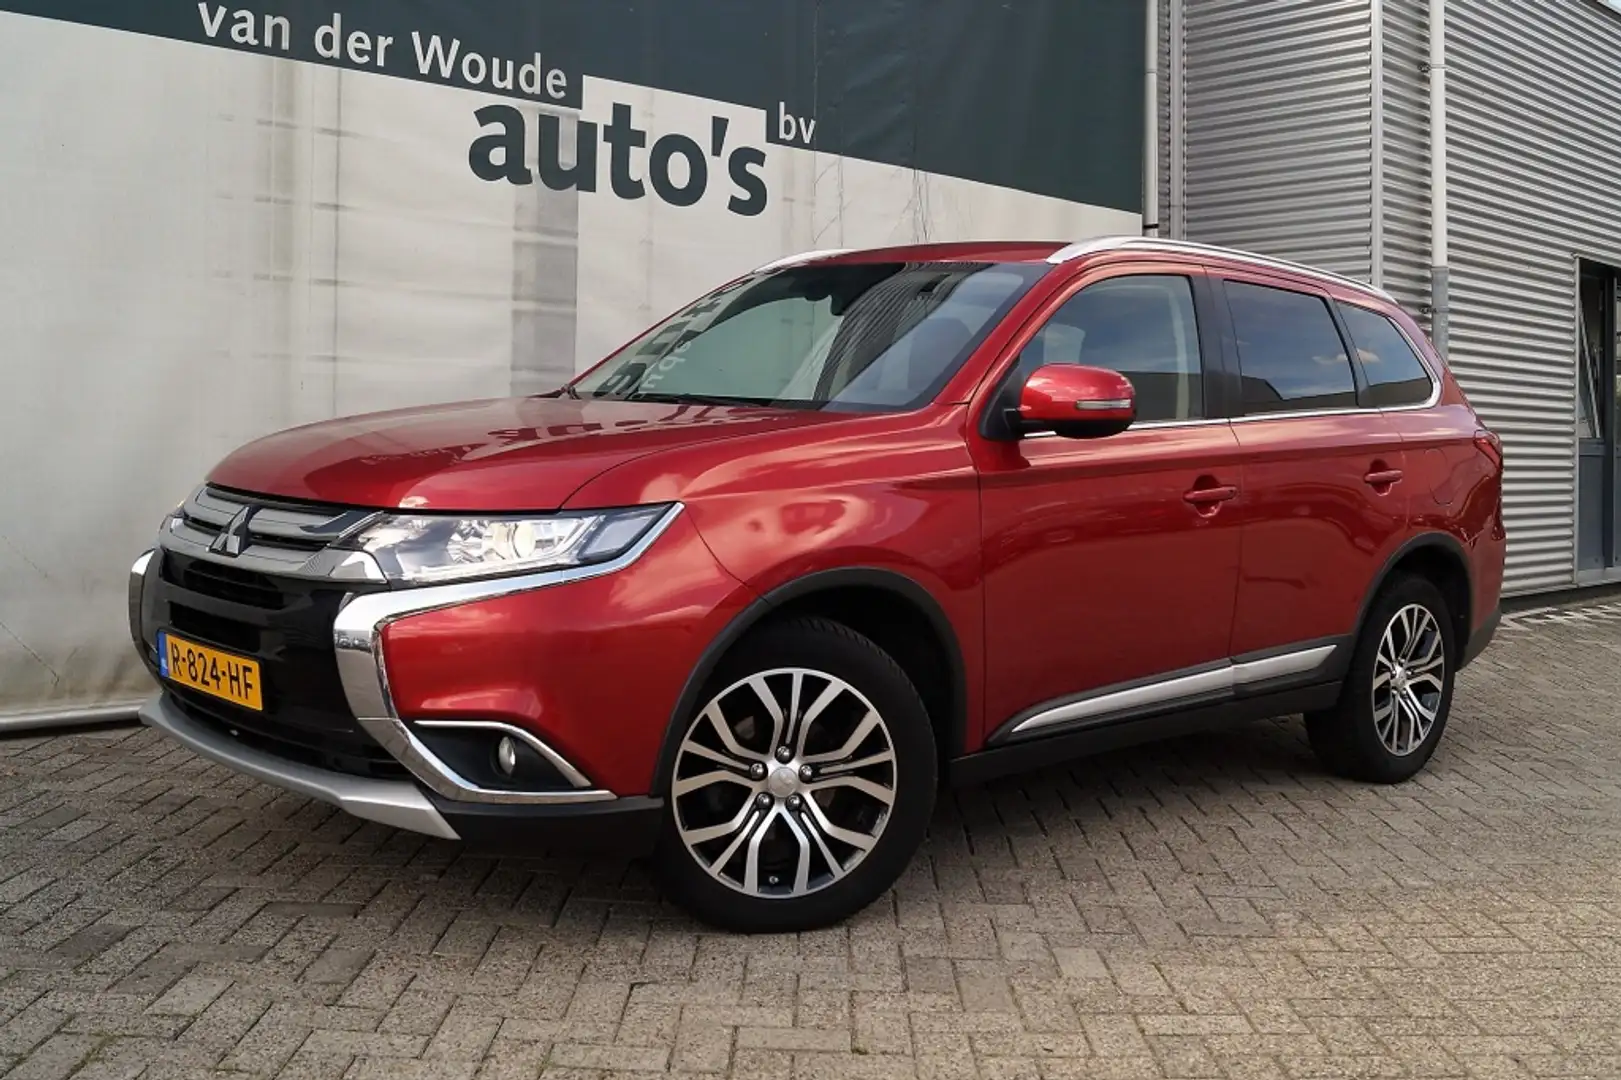 Mitsubishi Outlander 2.2 DI-D 150pk Business Edition 7-persoons -LEER- Rood - 2